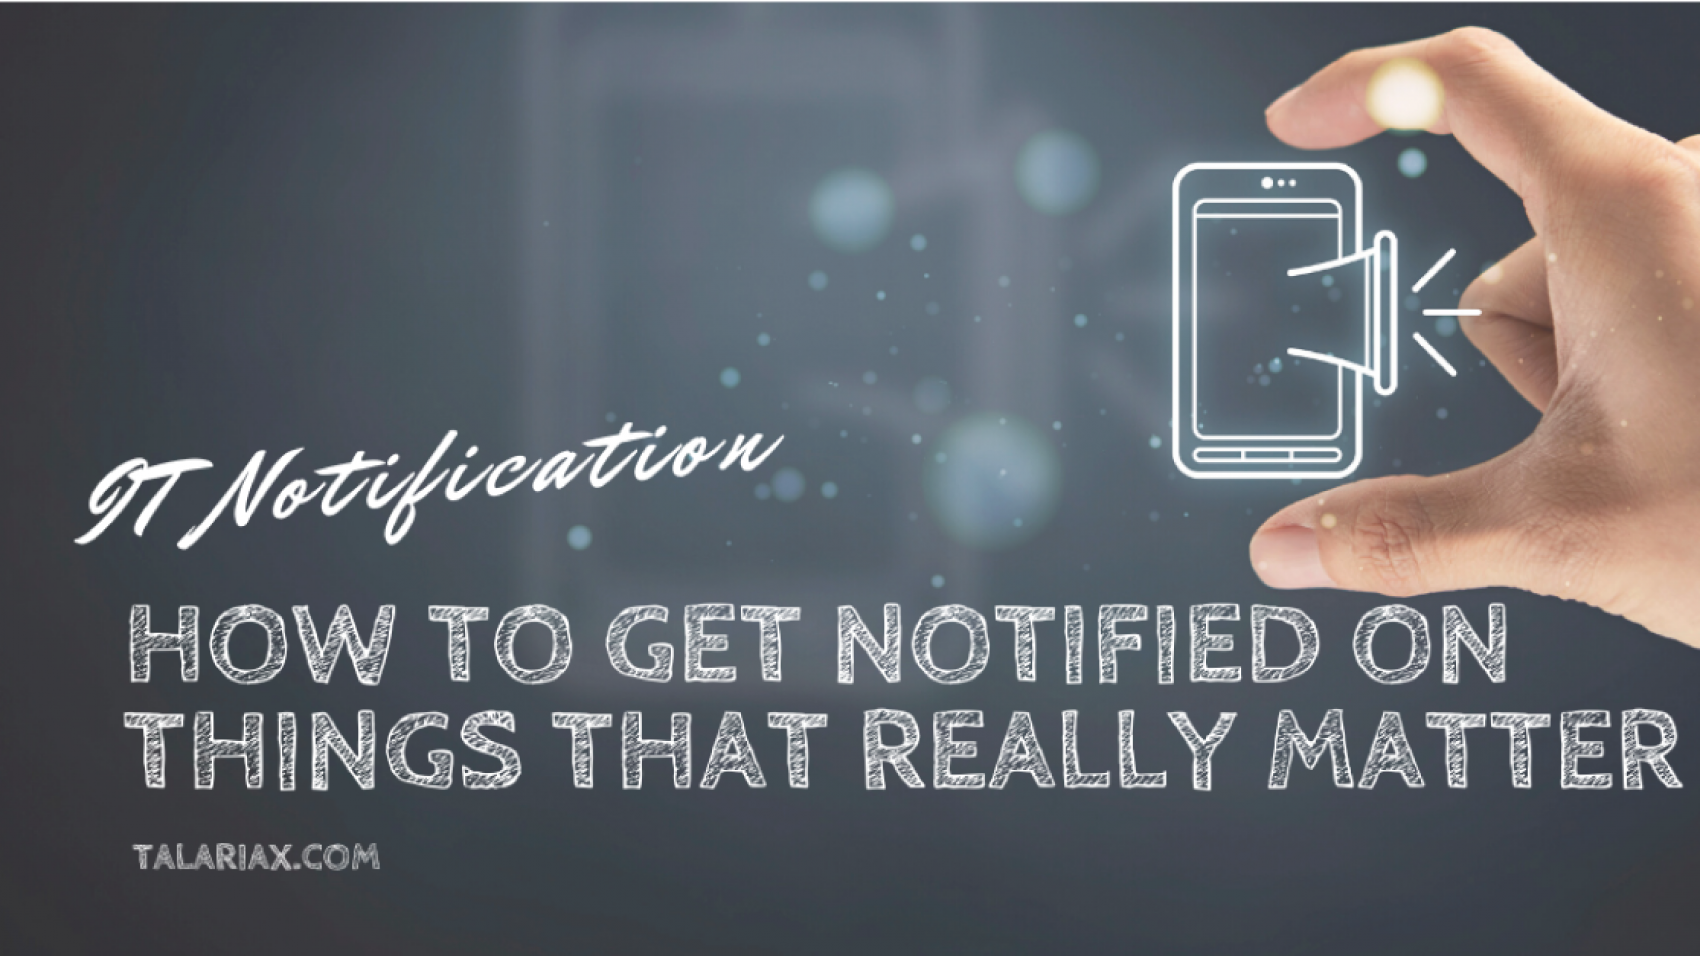 How-to-get-Notified-on-things-that-really-matter